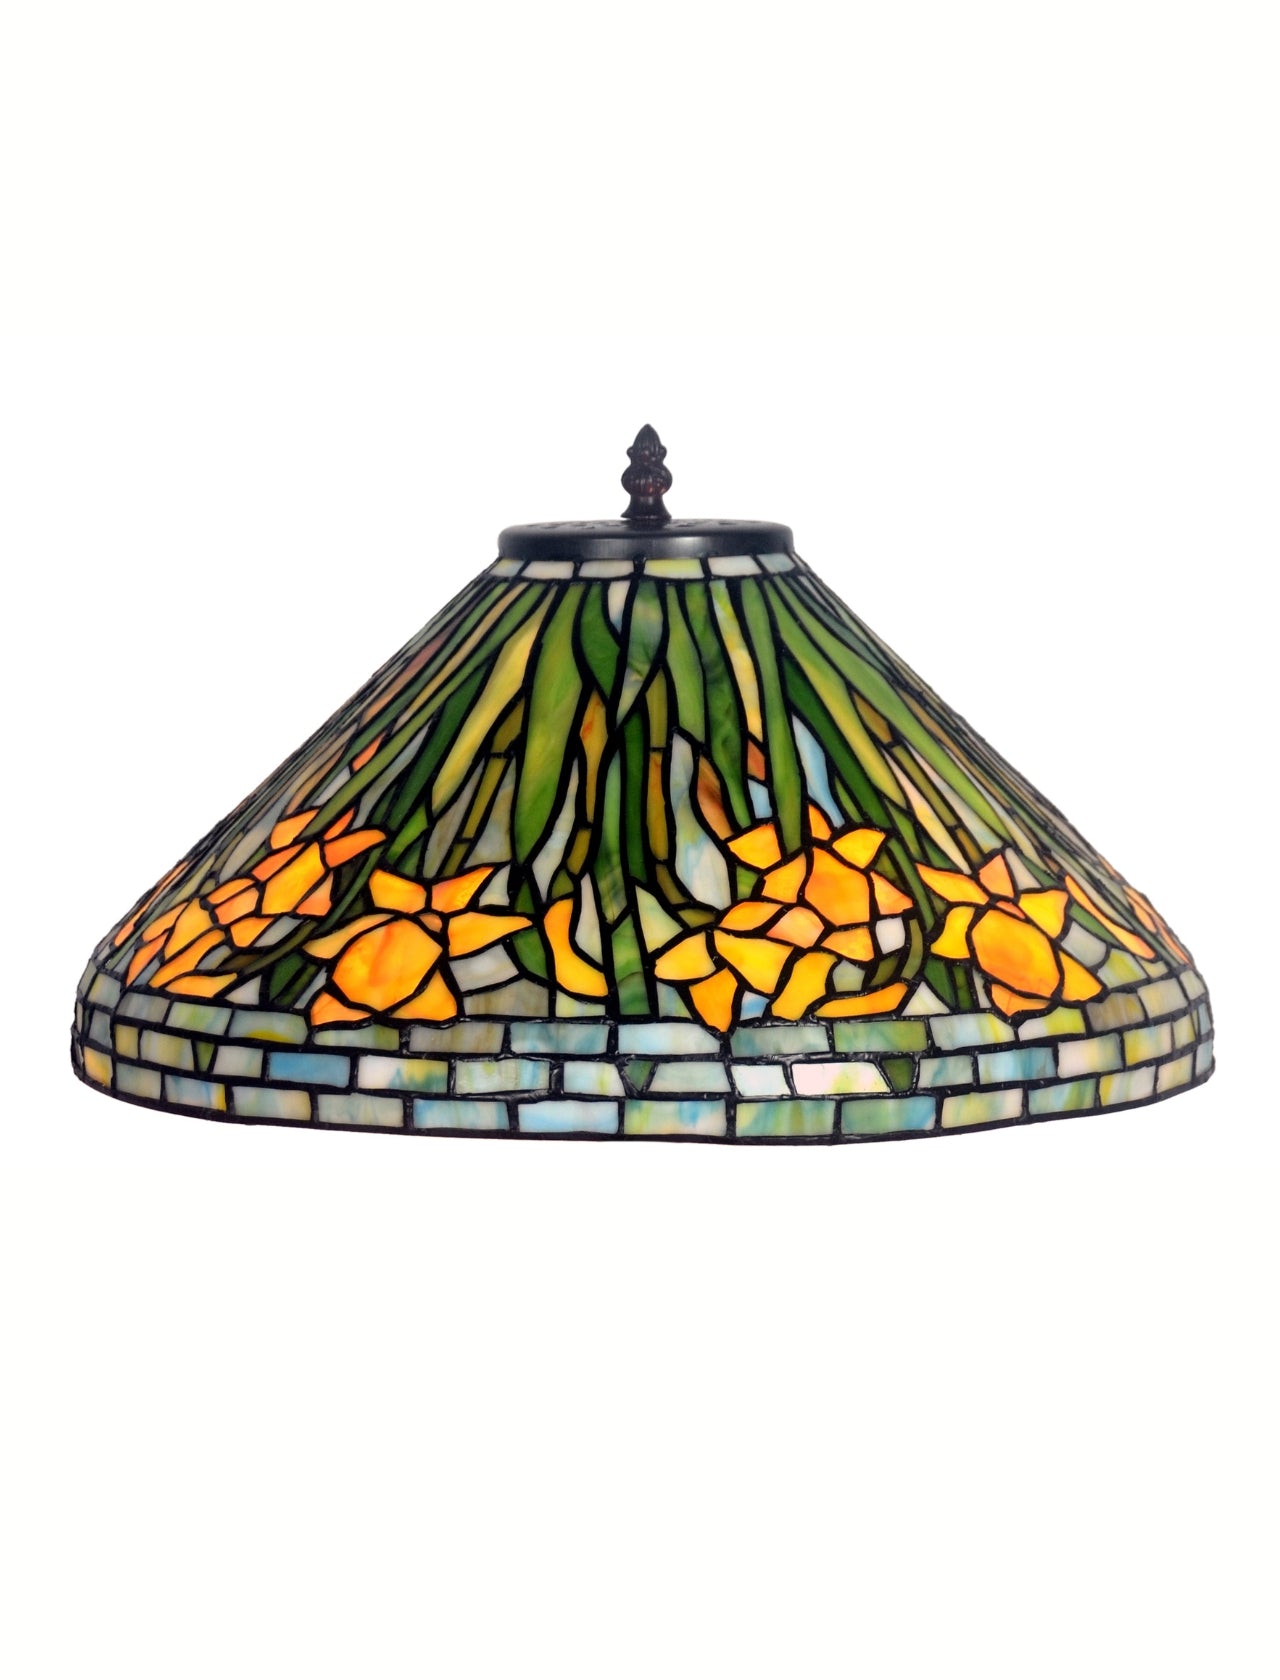 Legend Collection@Reproduction Tiffany Daffodil Flower Table Lamp  With "Turtleback Tile" Lighted base